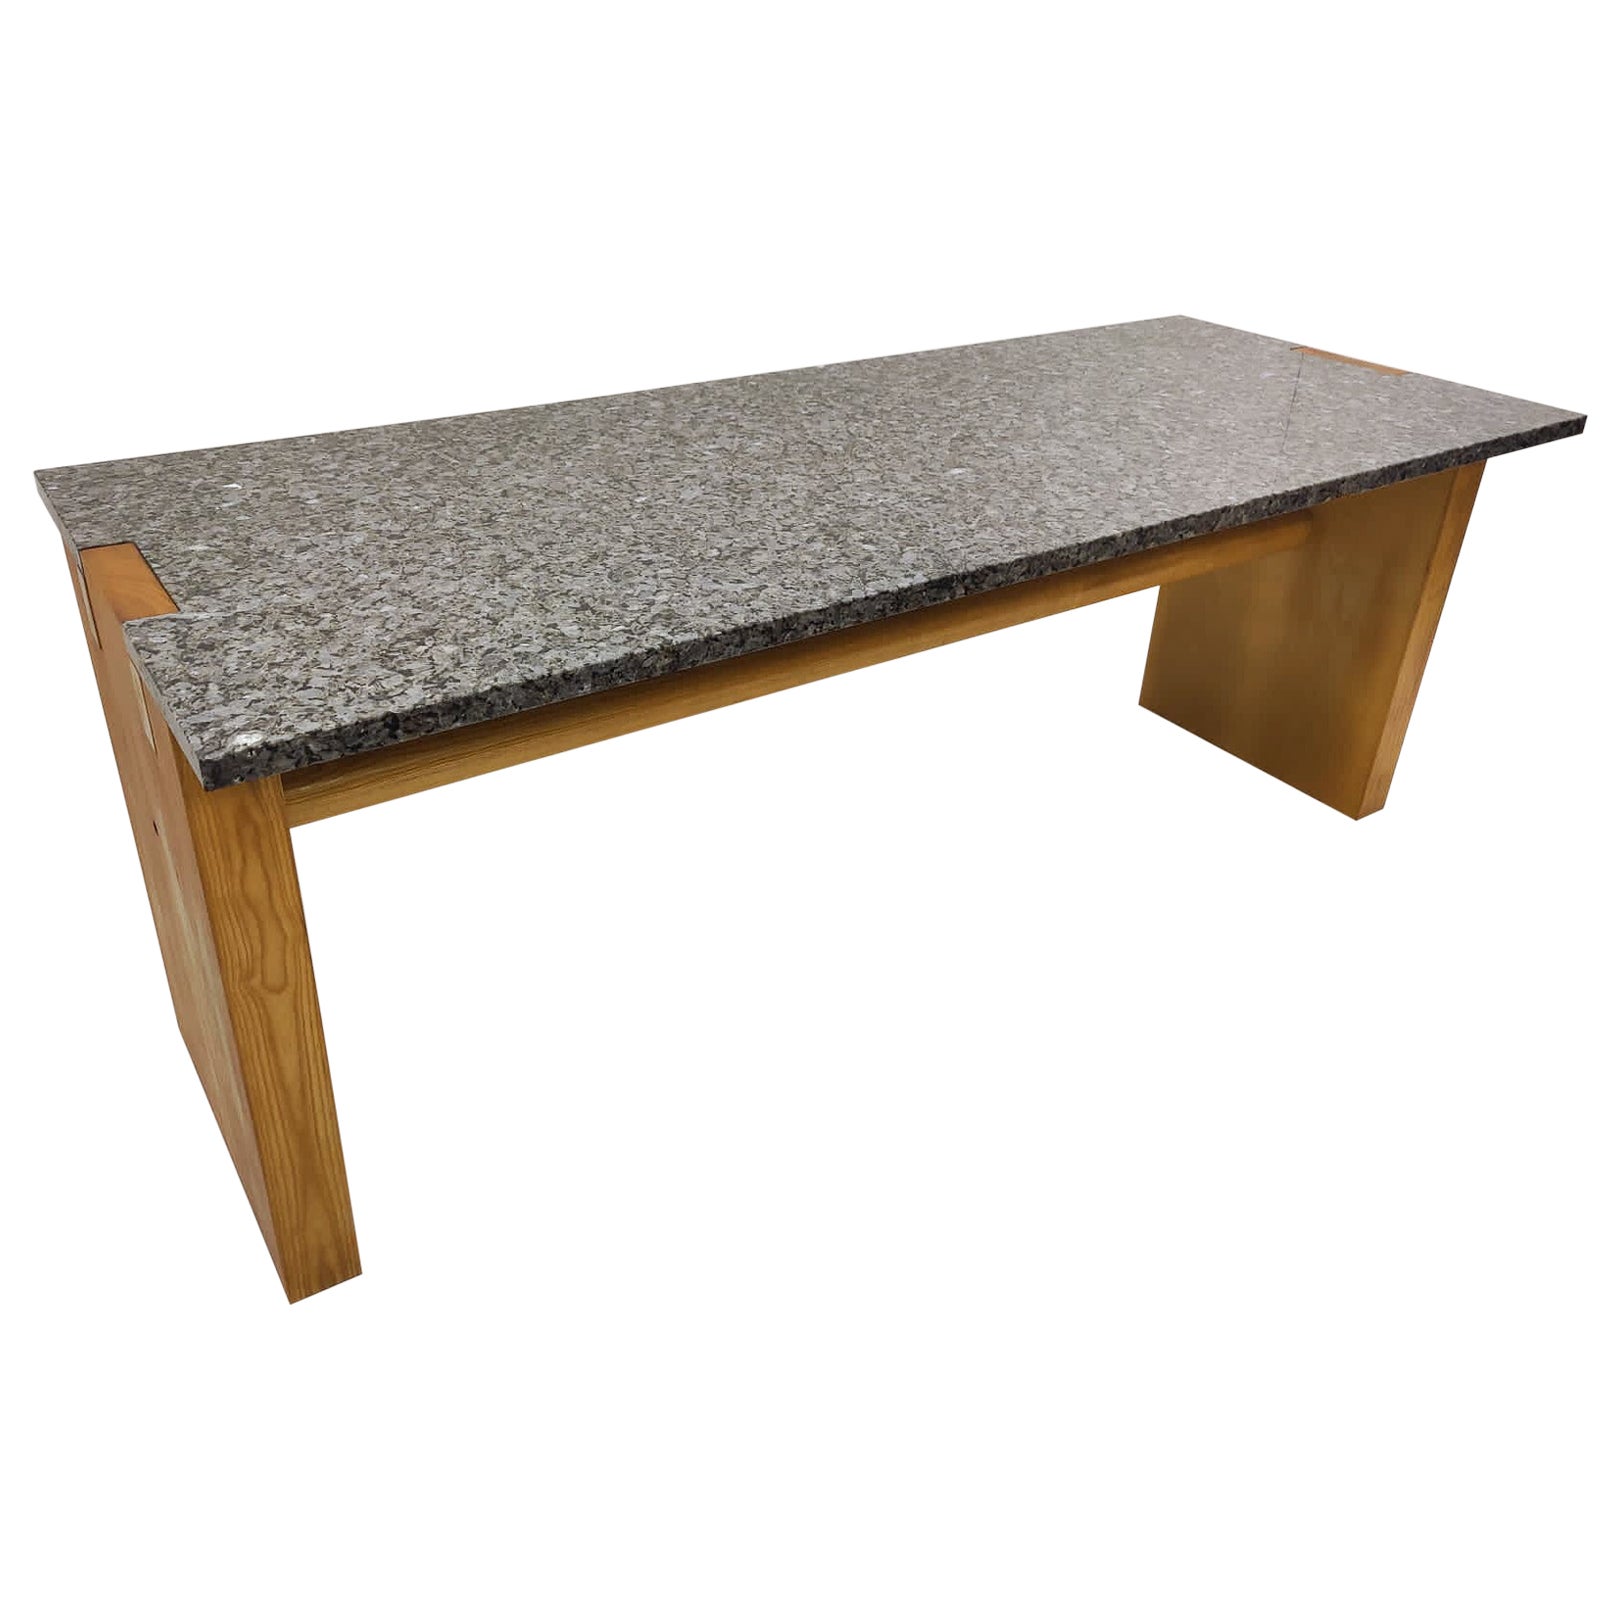 Console Model 'Valmarana' by Carlo Scarpa for Simon, Ash and Granite, Italy  1972 For Sale at 1stDibs